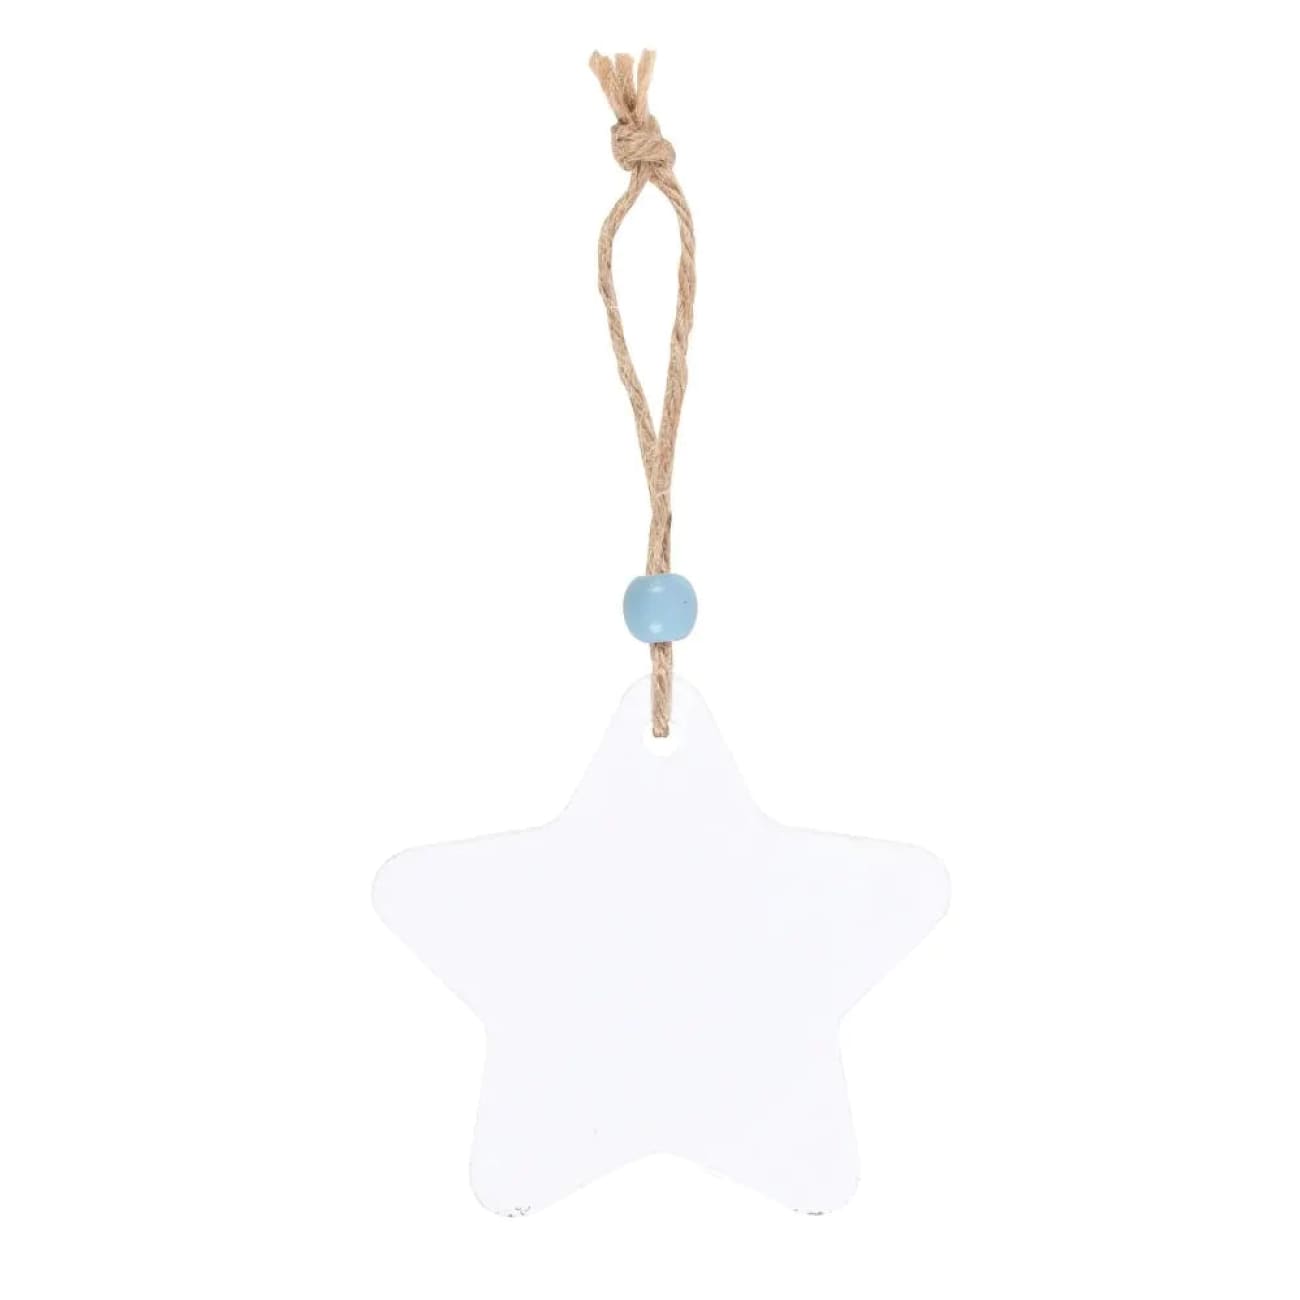 Dad Hanging Star Sentiment Sign - Father’s Day gifts A small